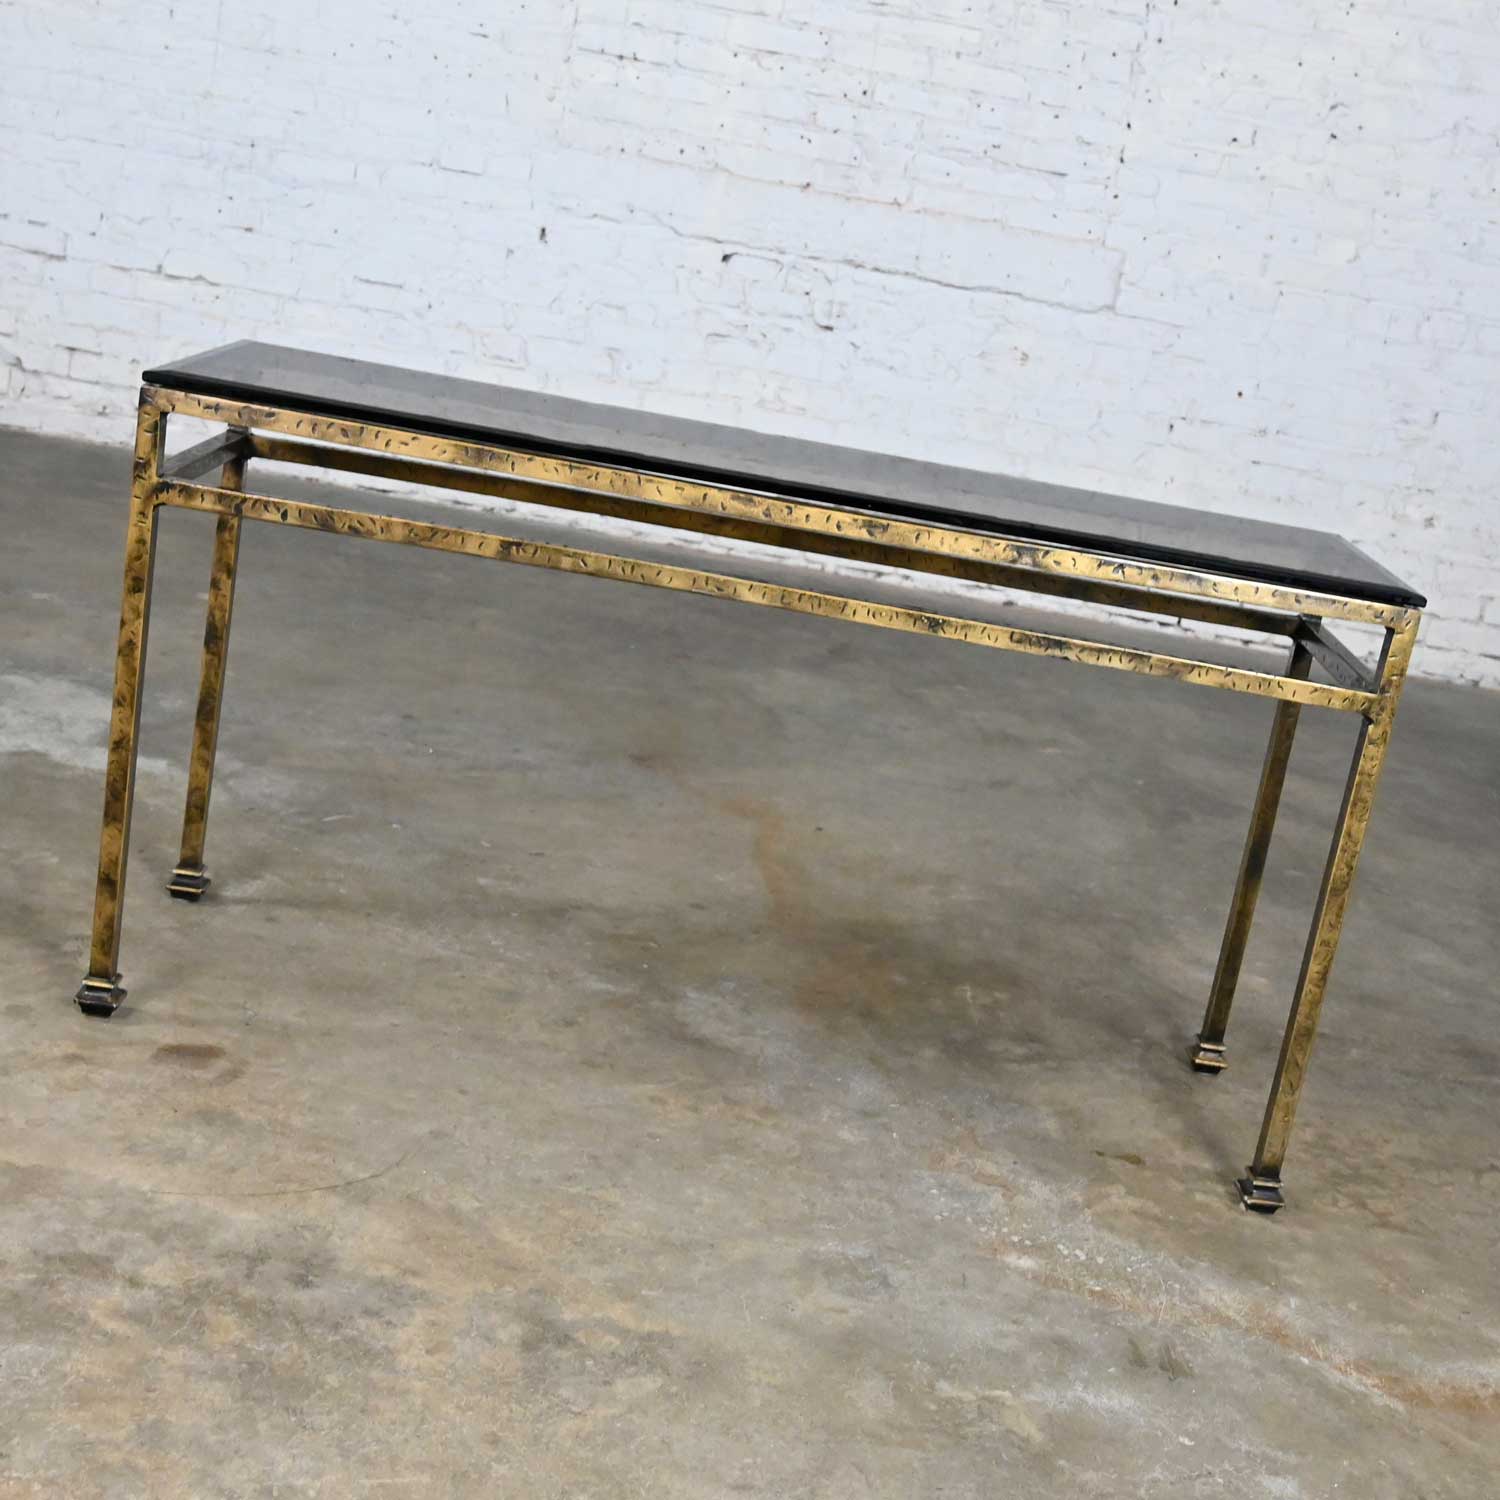 Modern Iron Console Sofa Table with Gold Hammered Look & Smoked & Beveled Glass Top